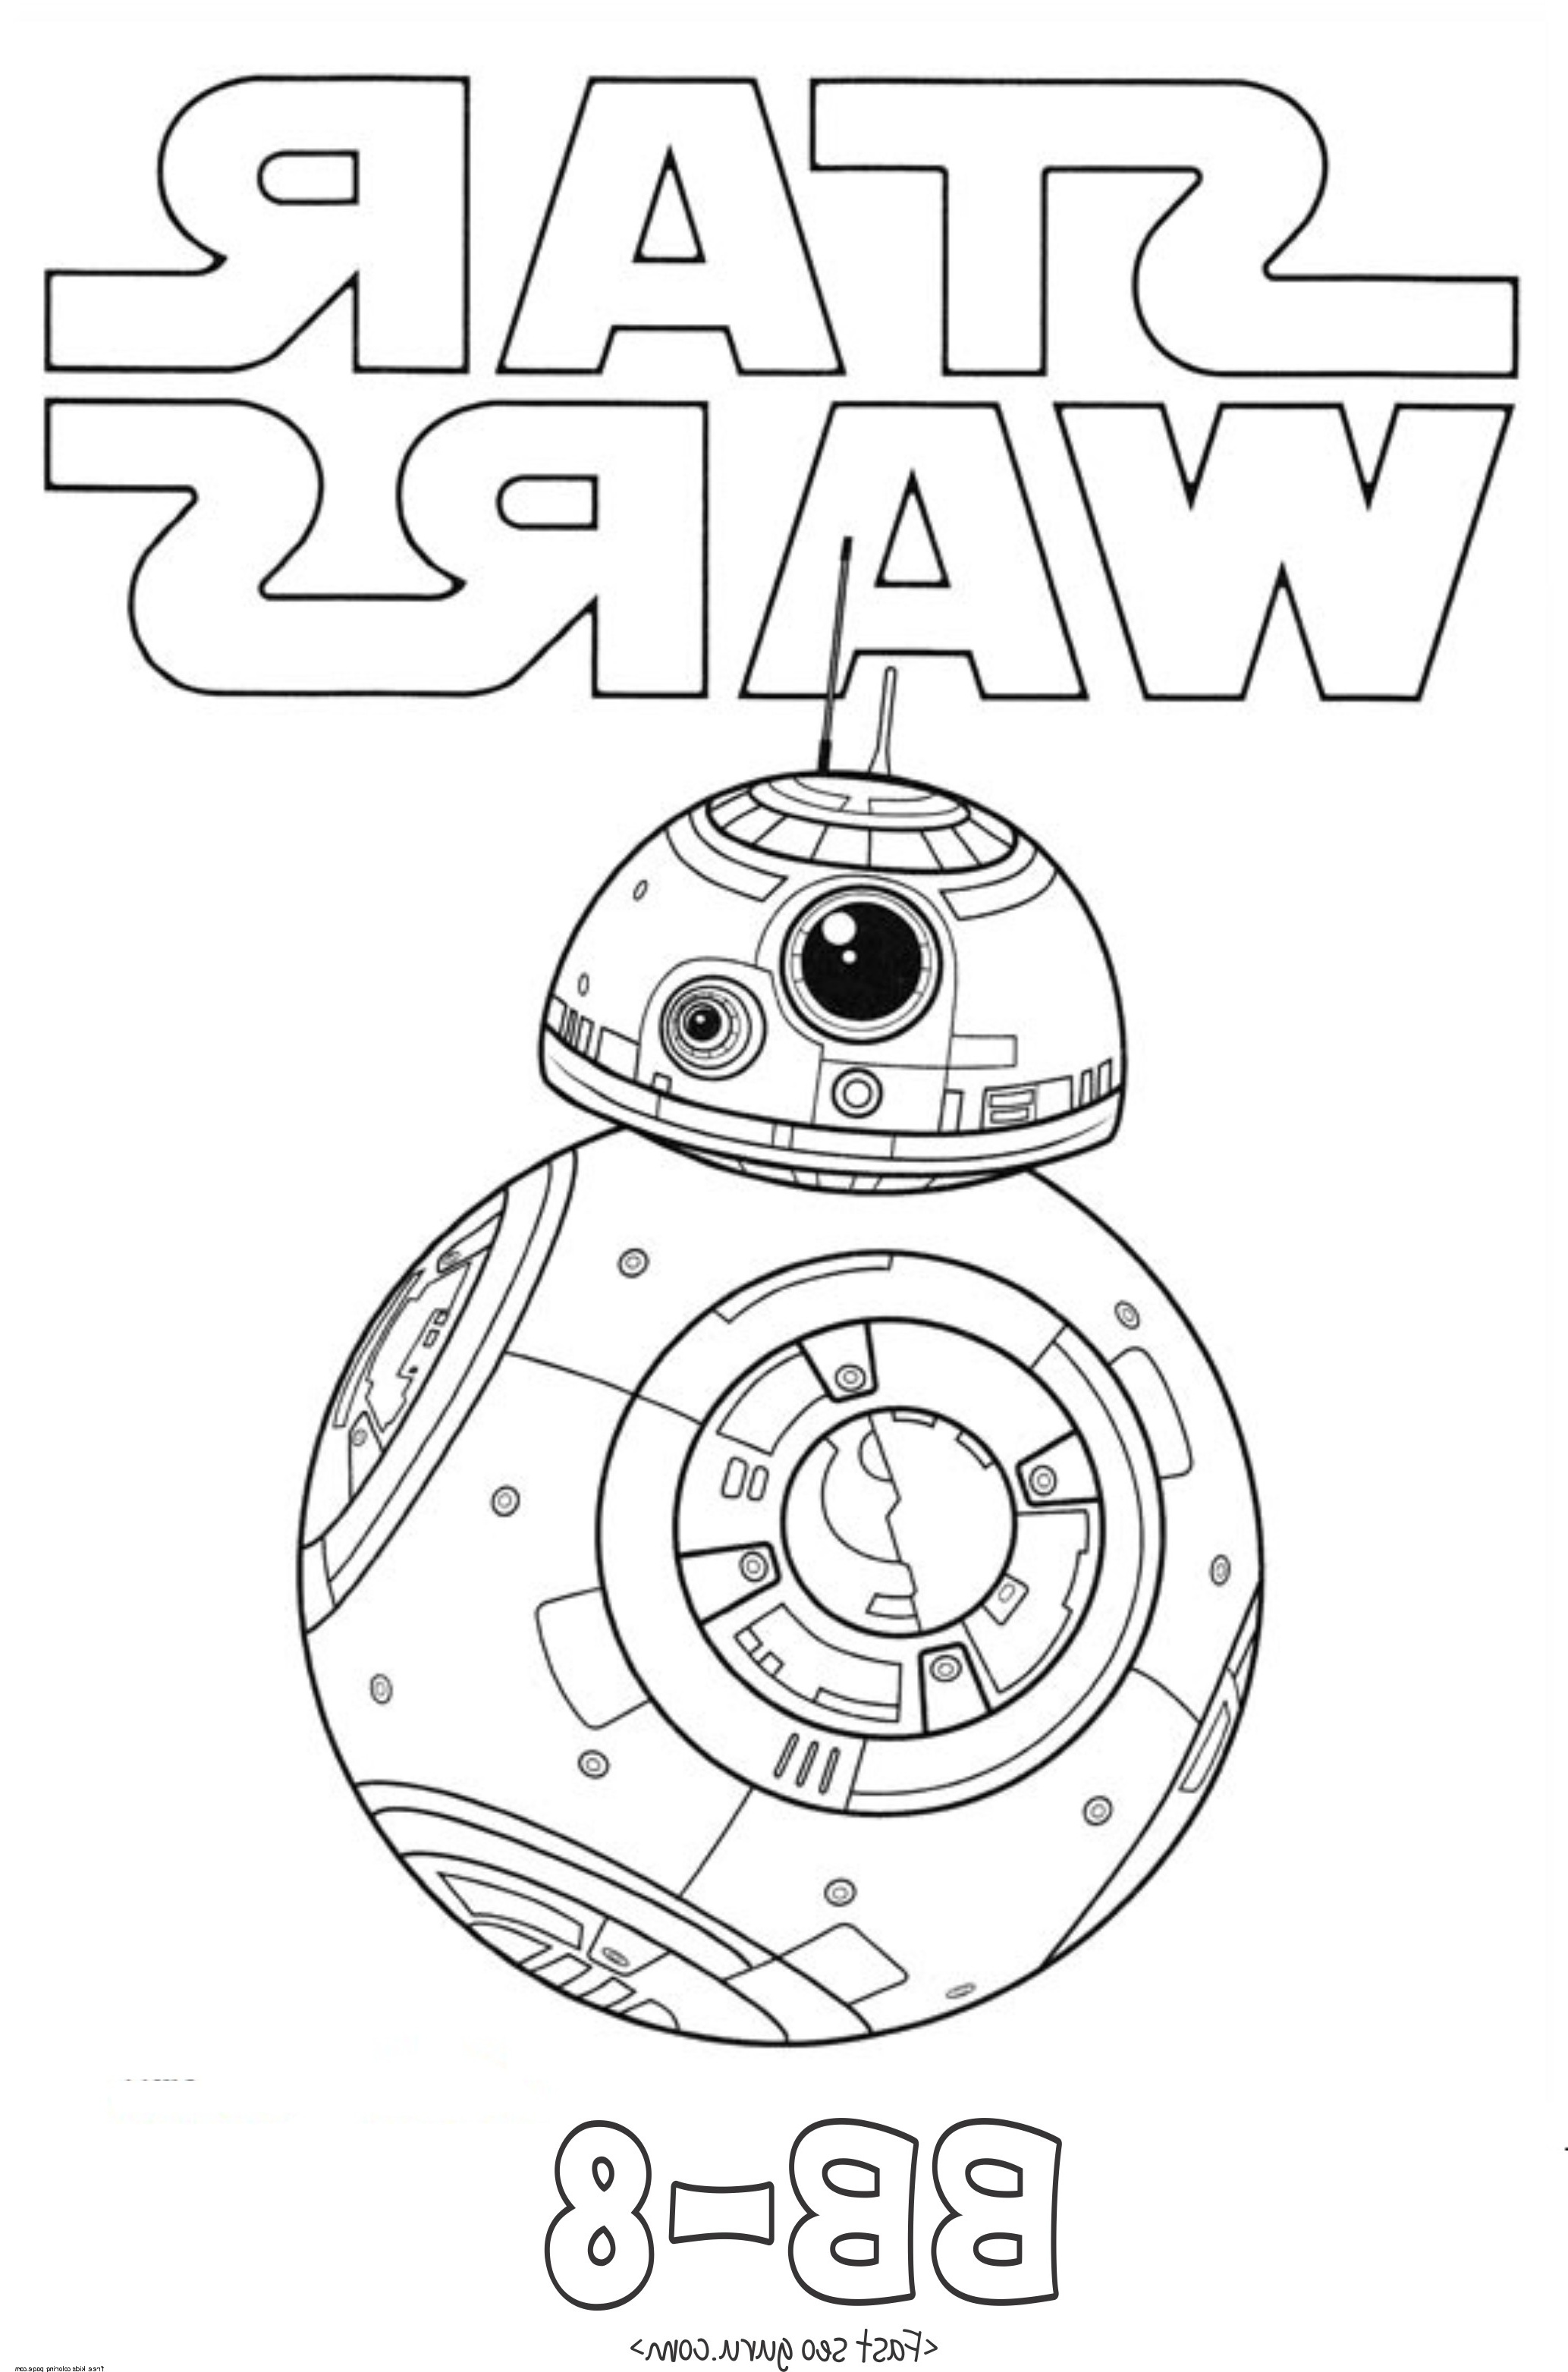 Dessin Stars Wars Cool Photographie Star Wars the force Awakens Bb 8 Coloring Pages Free